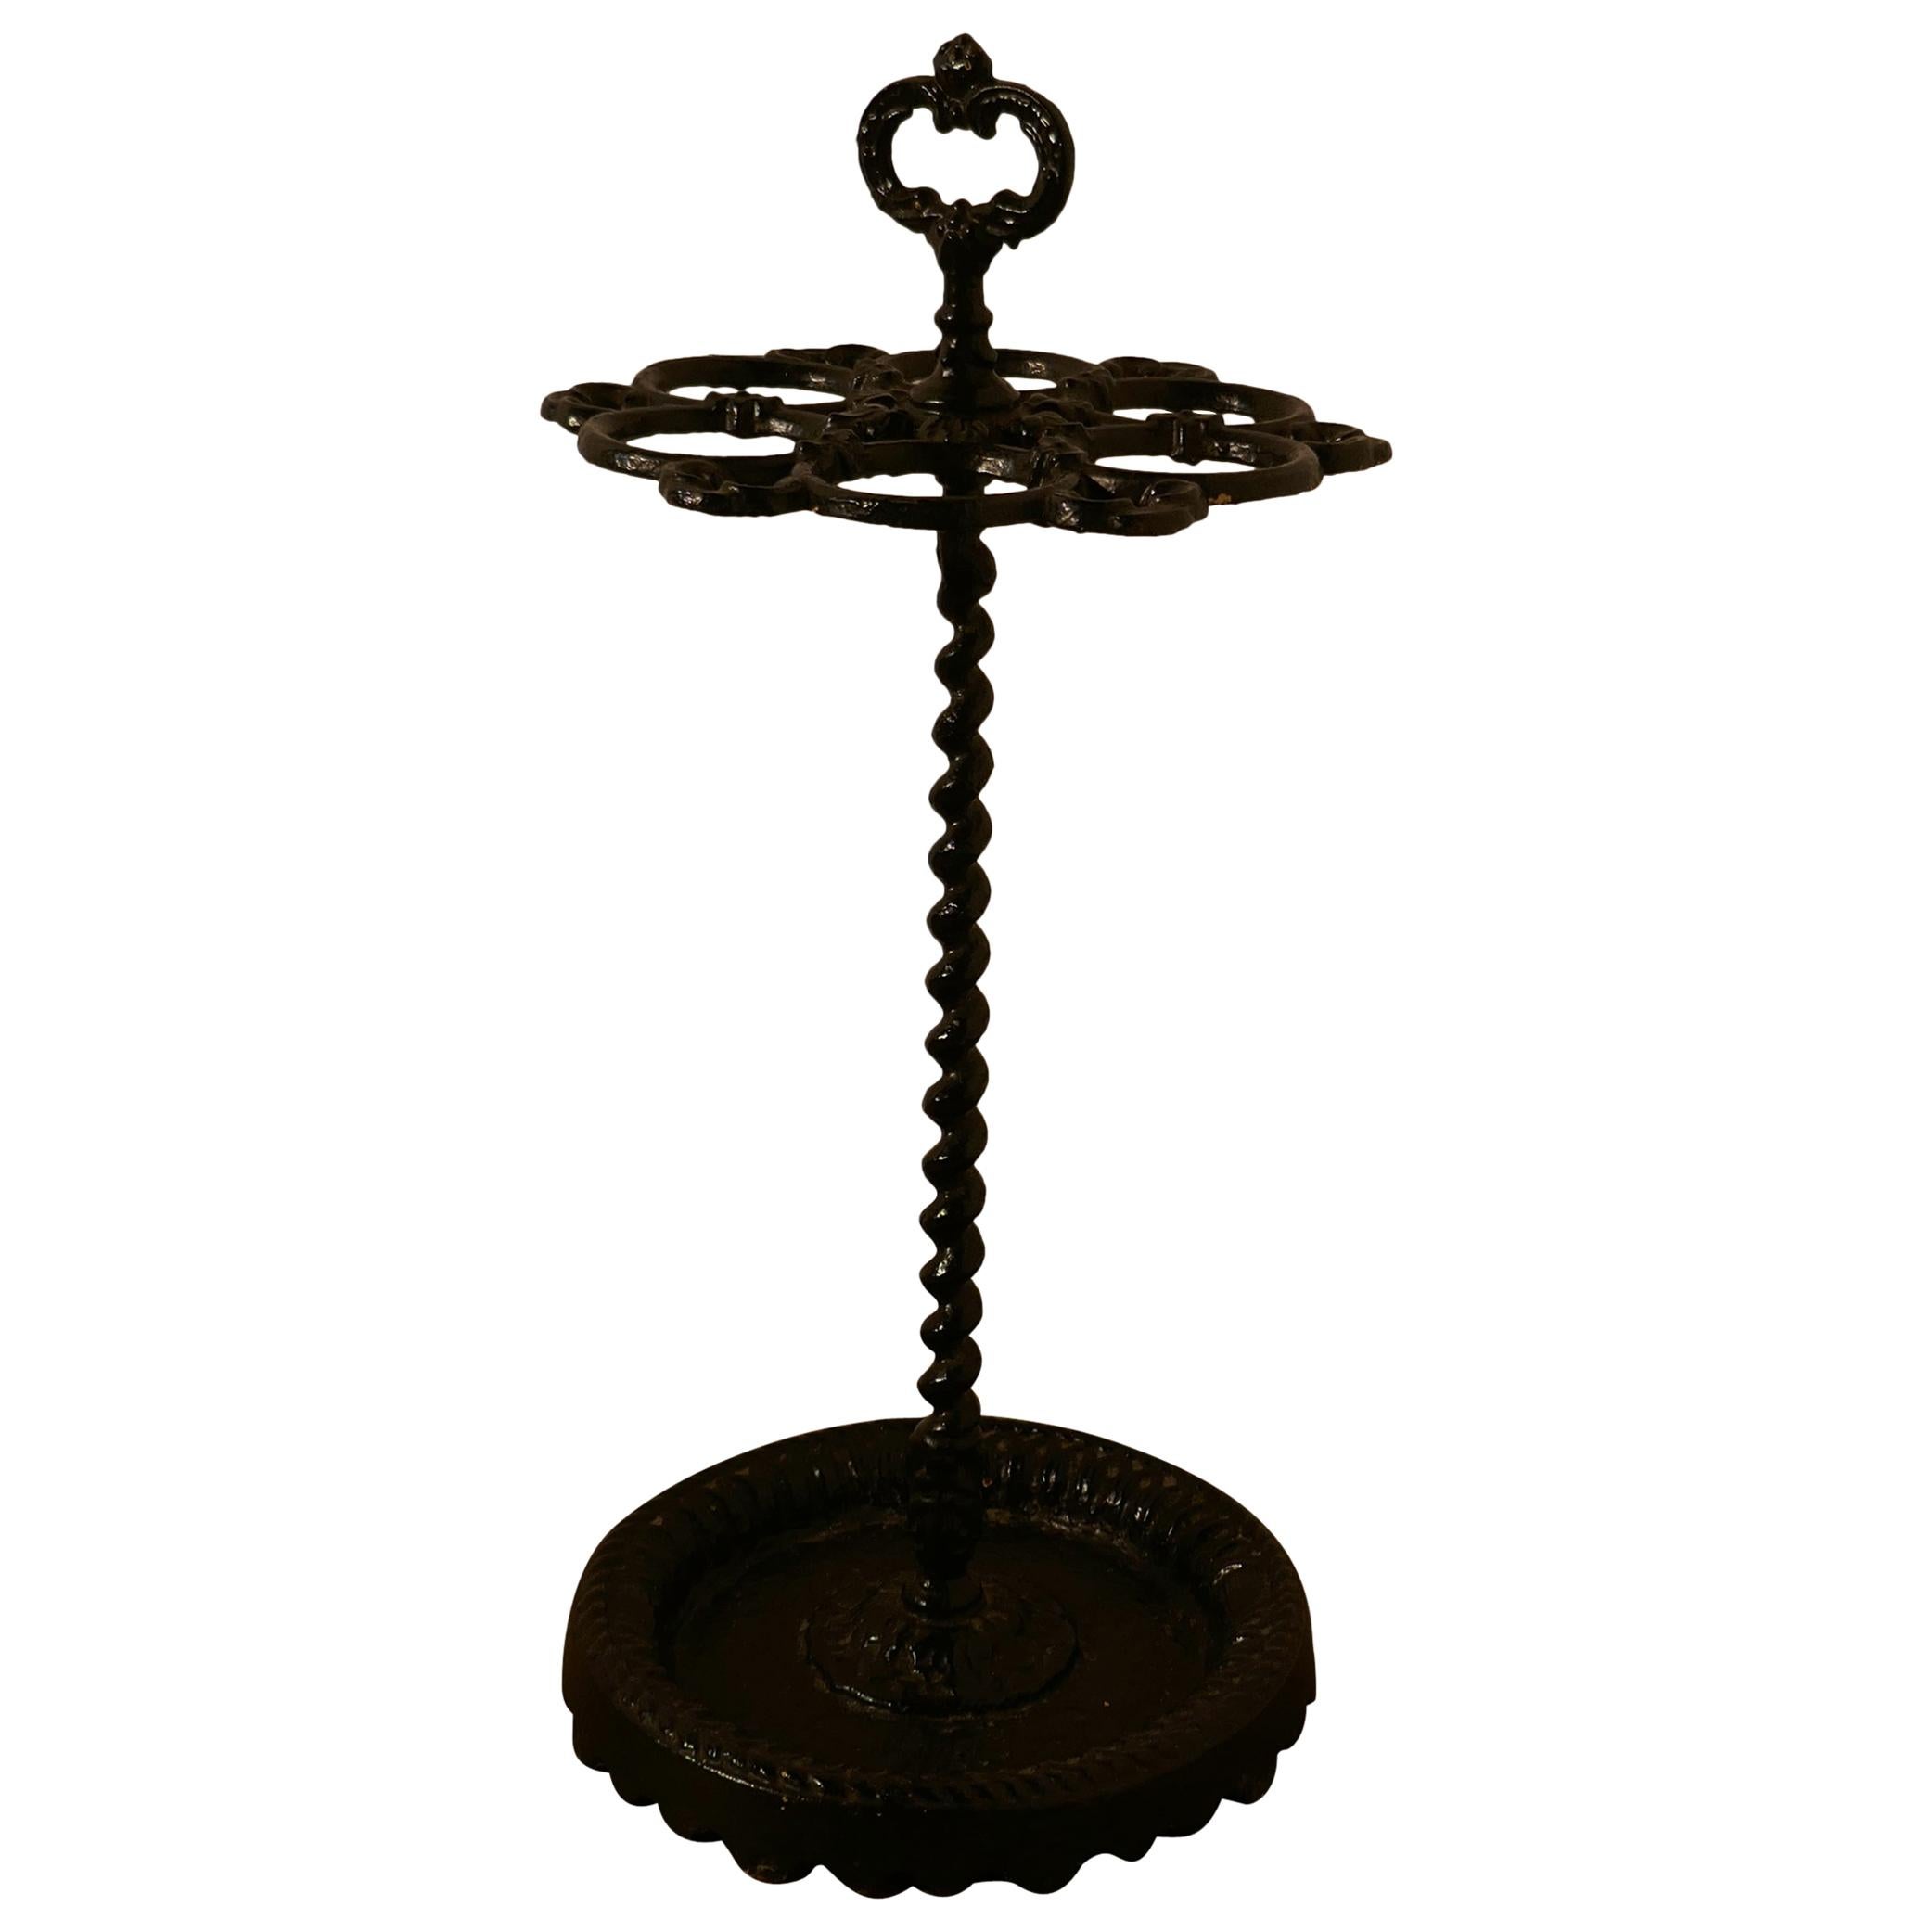 French Cast Iron Walking Stick Stand or Umbrella Stand